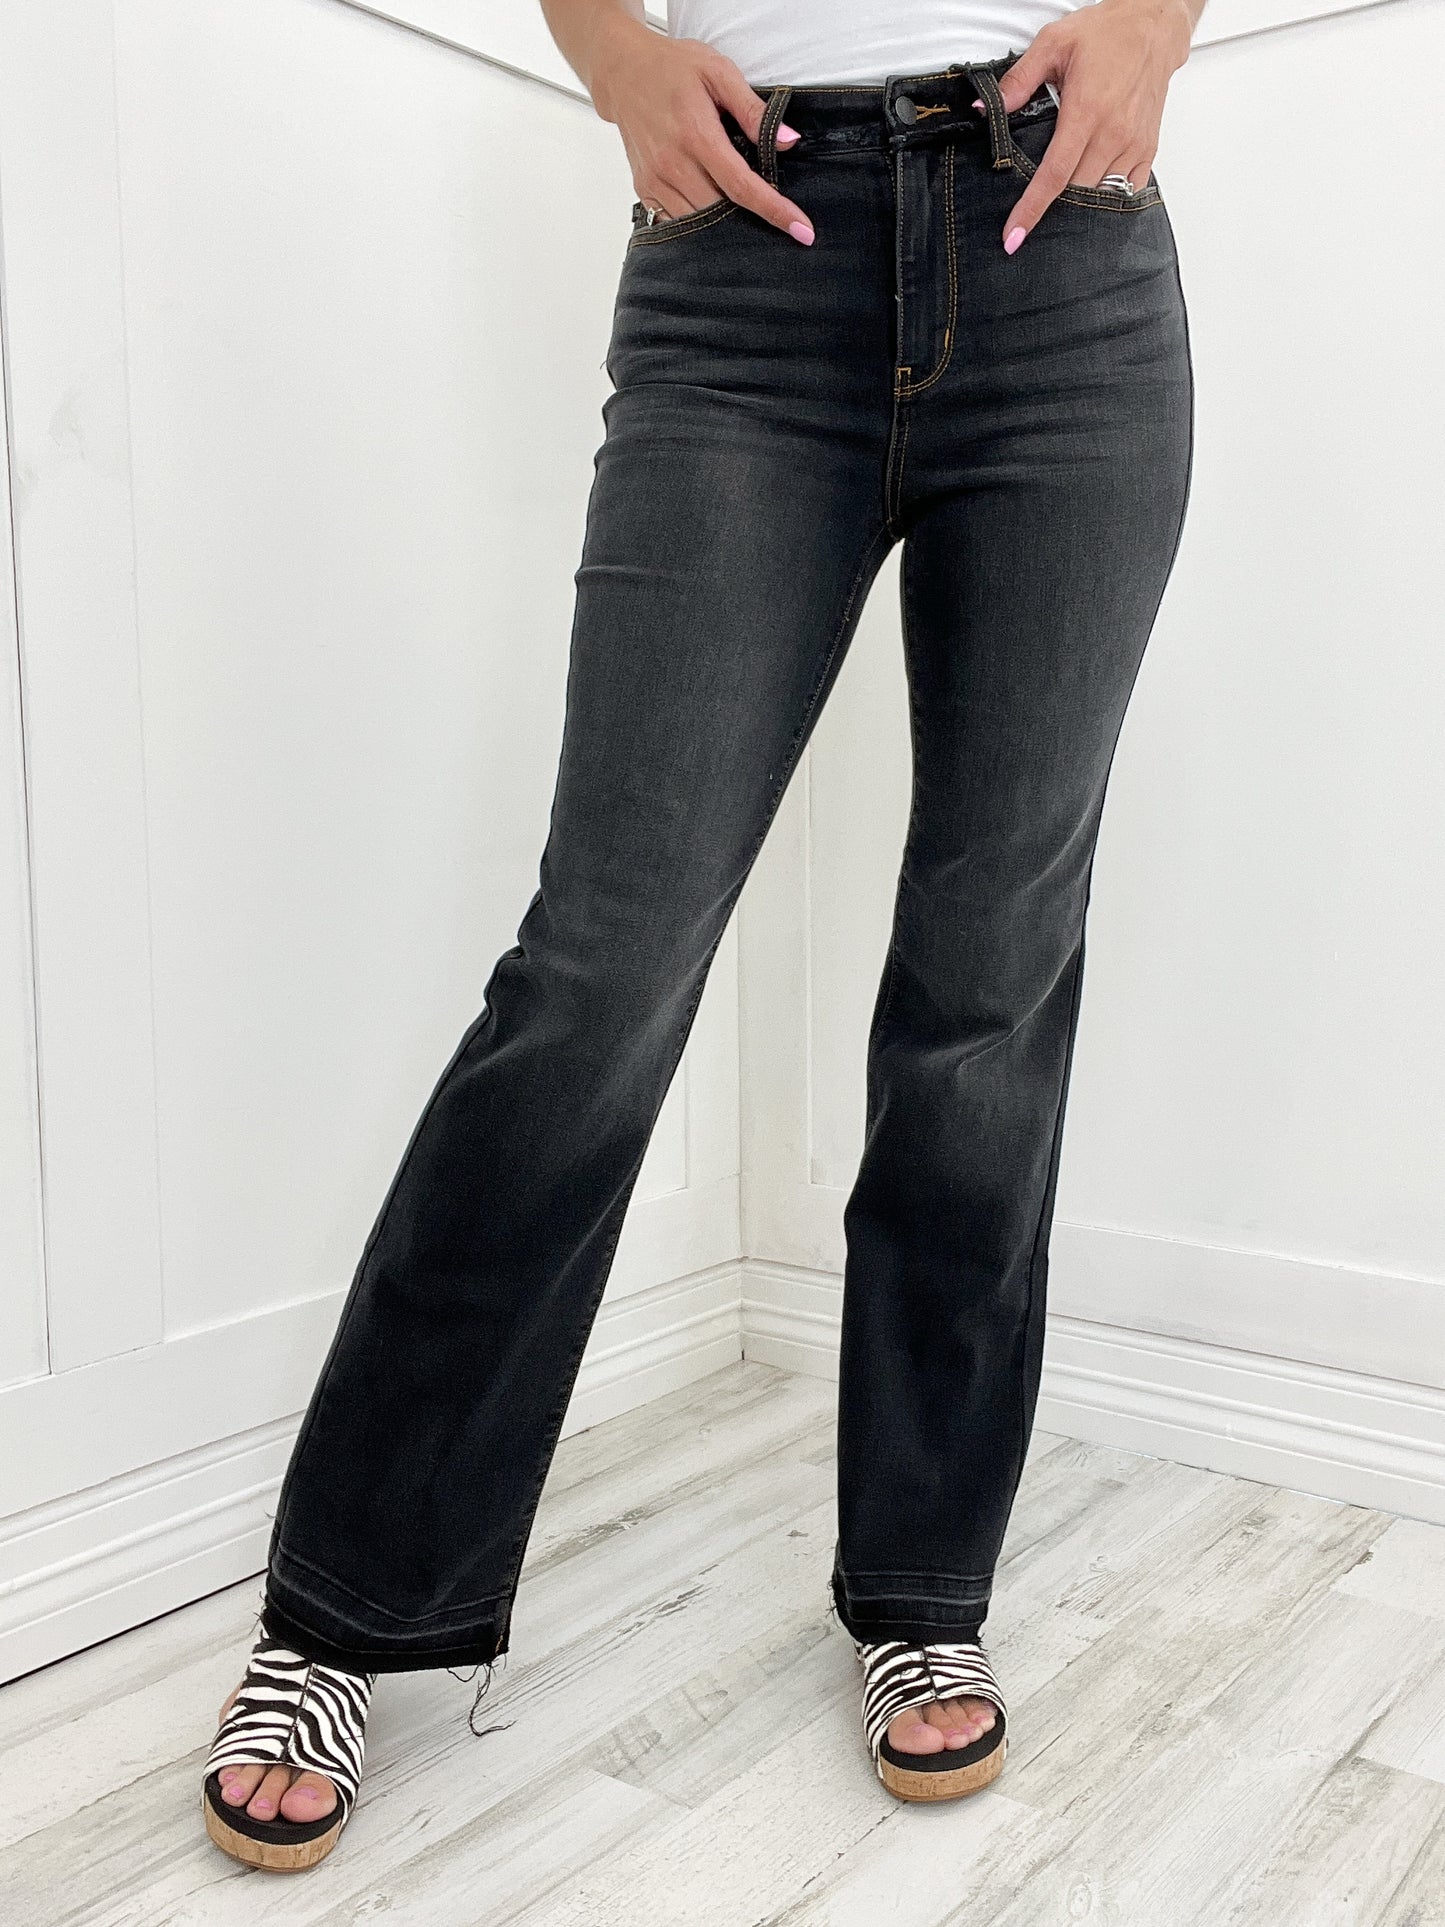 Judy Blue High Waist Pull on Slim Boot Cut Jeans – Emma Lou's Boutique